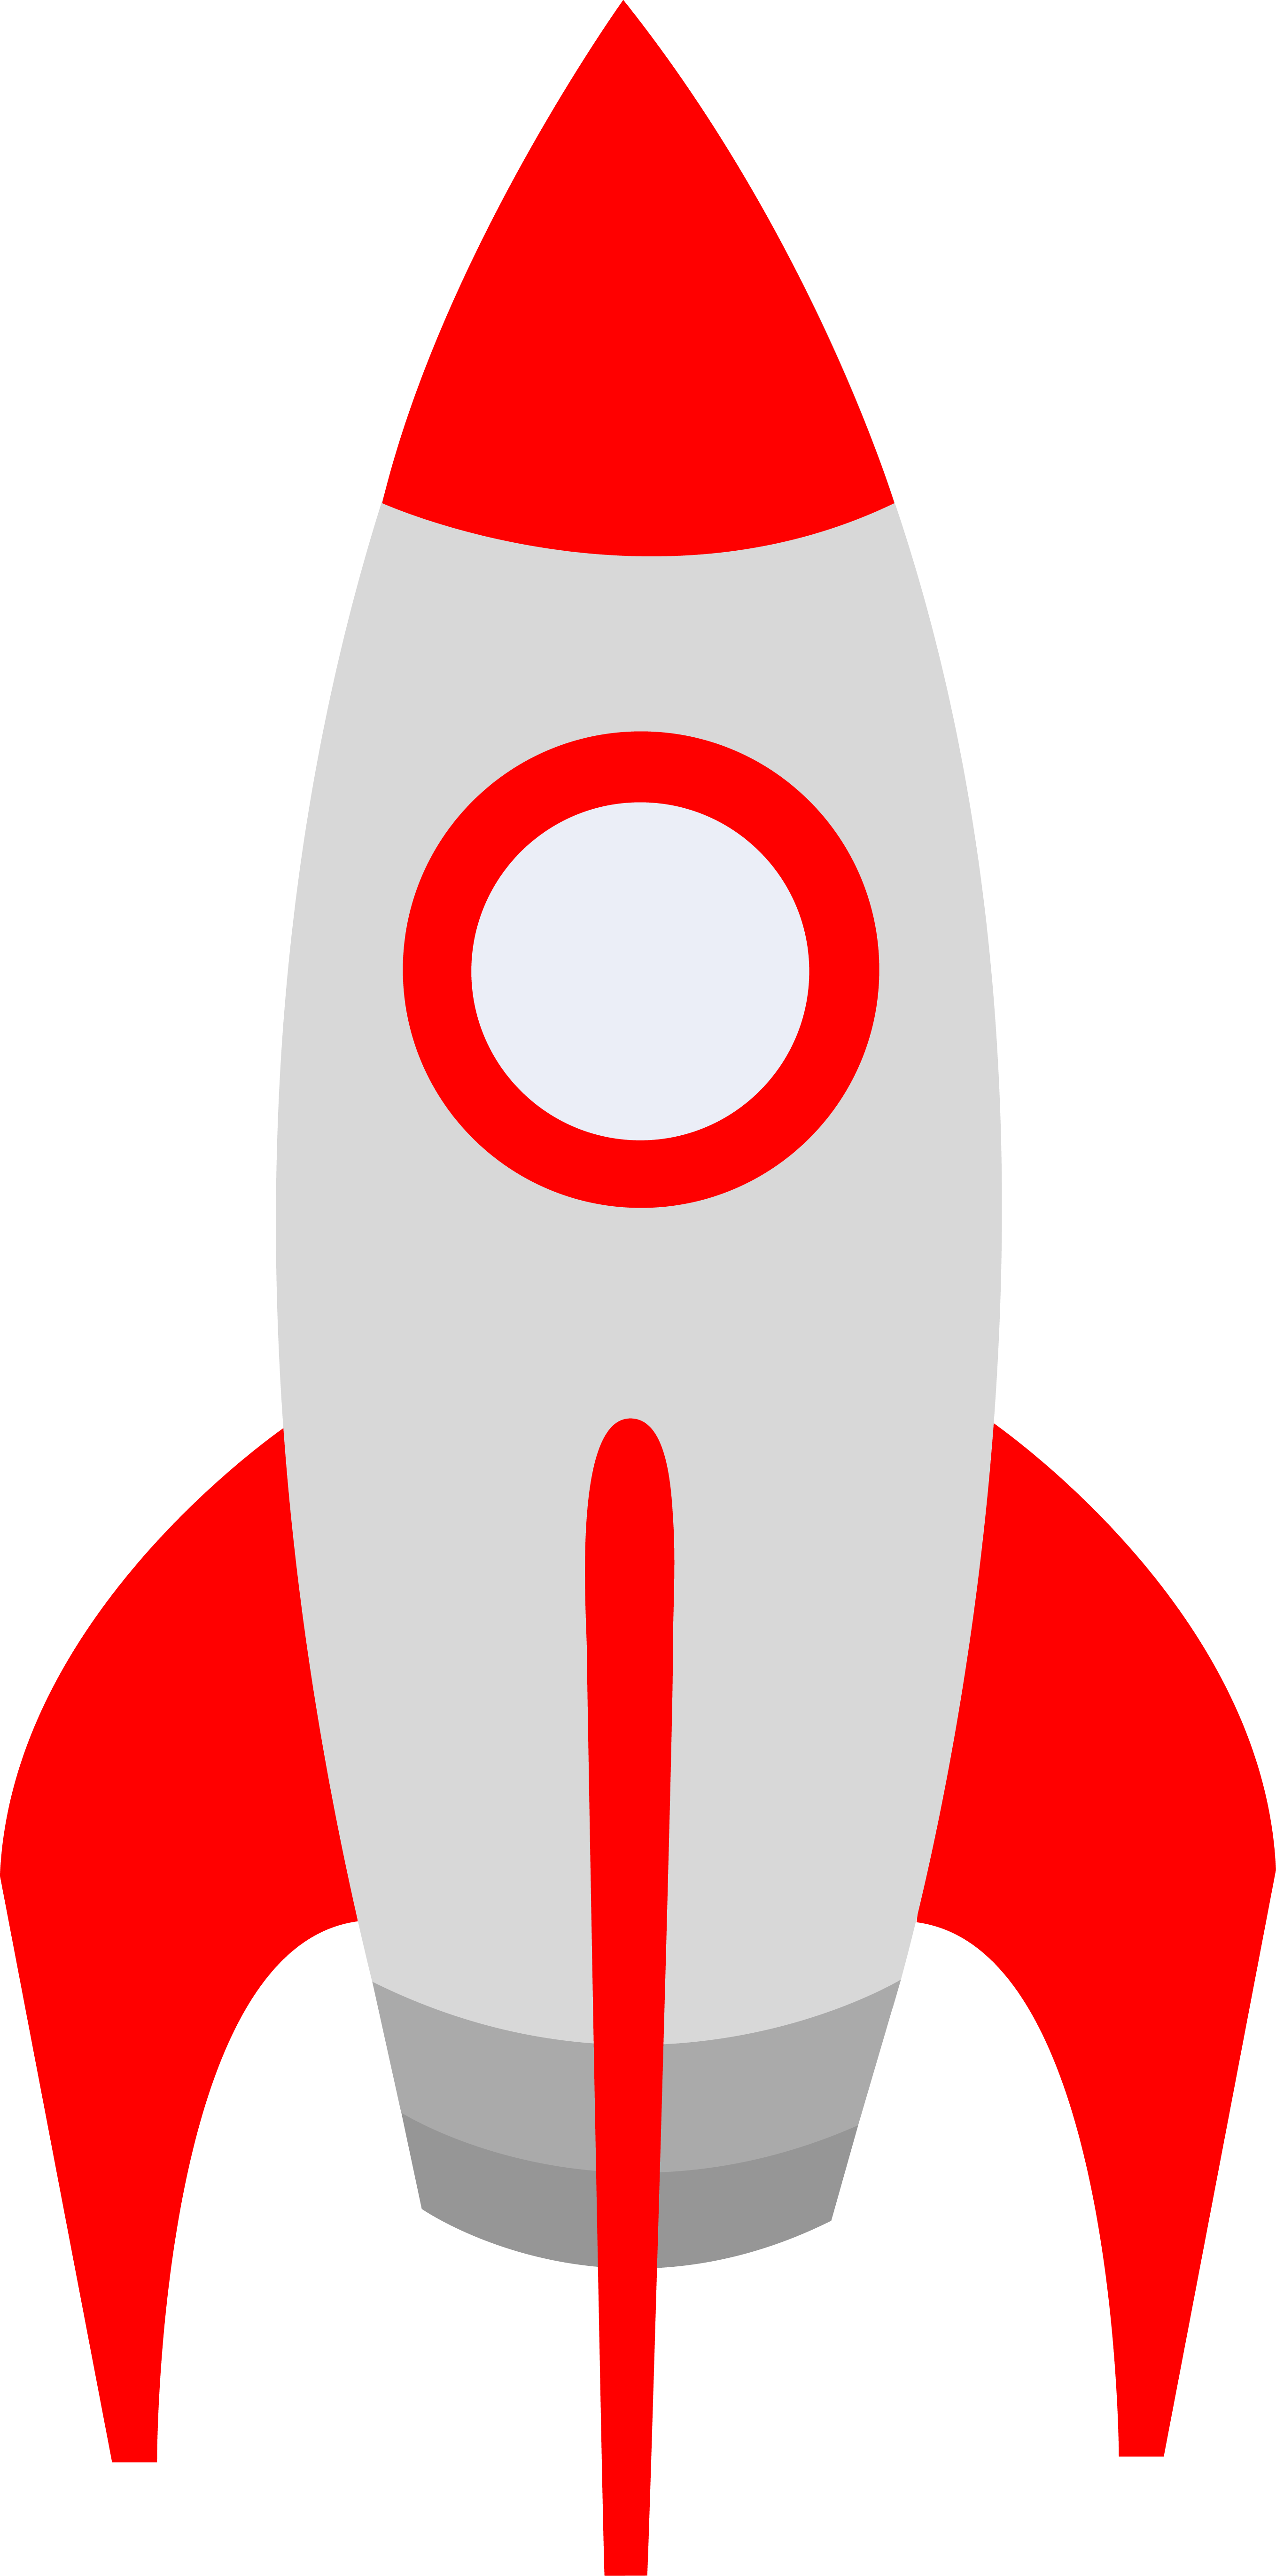 Rocketship clipart space flight. Rockets png images free